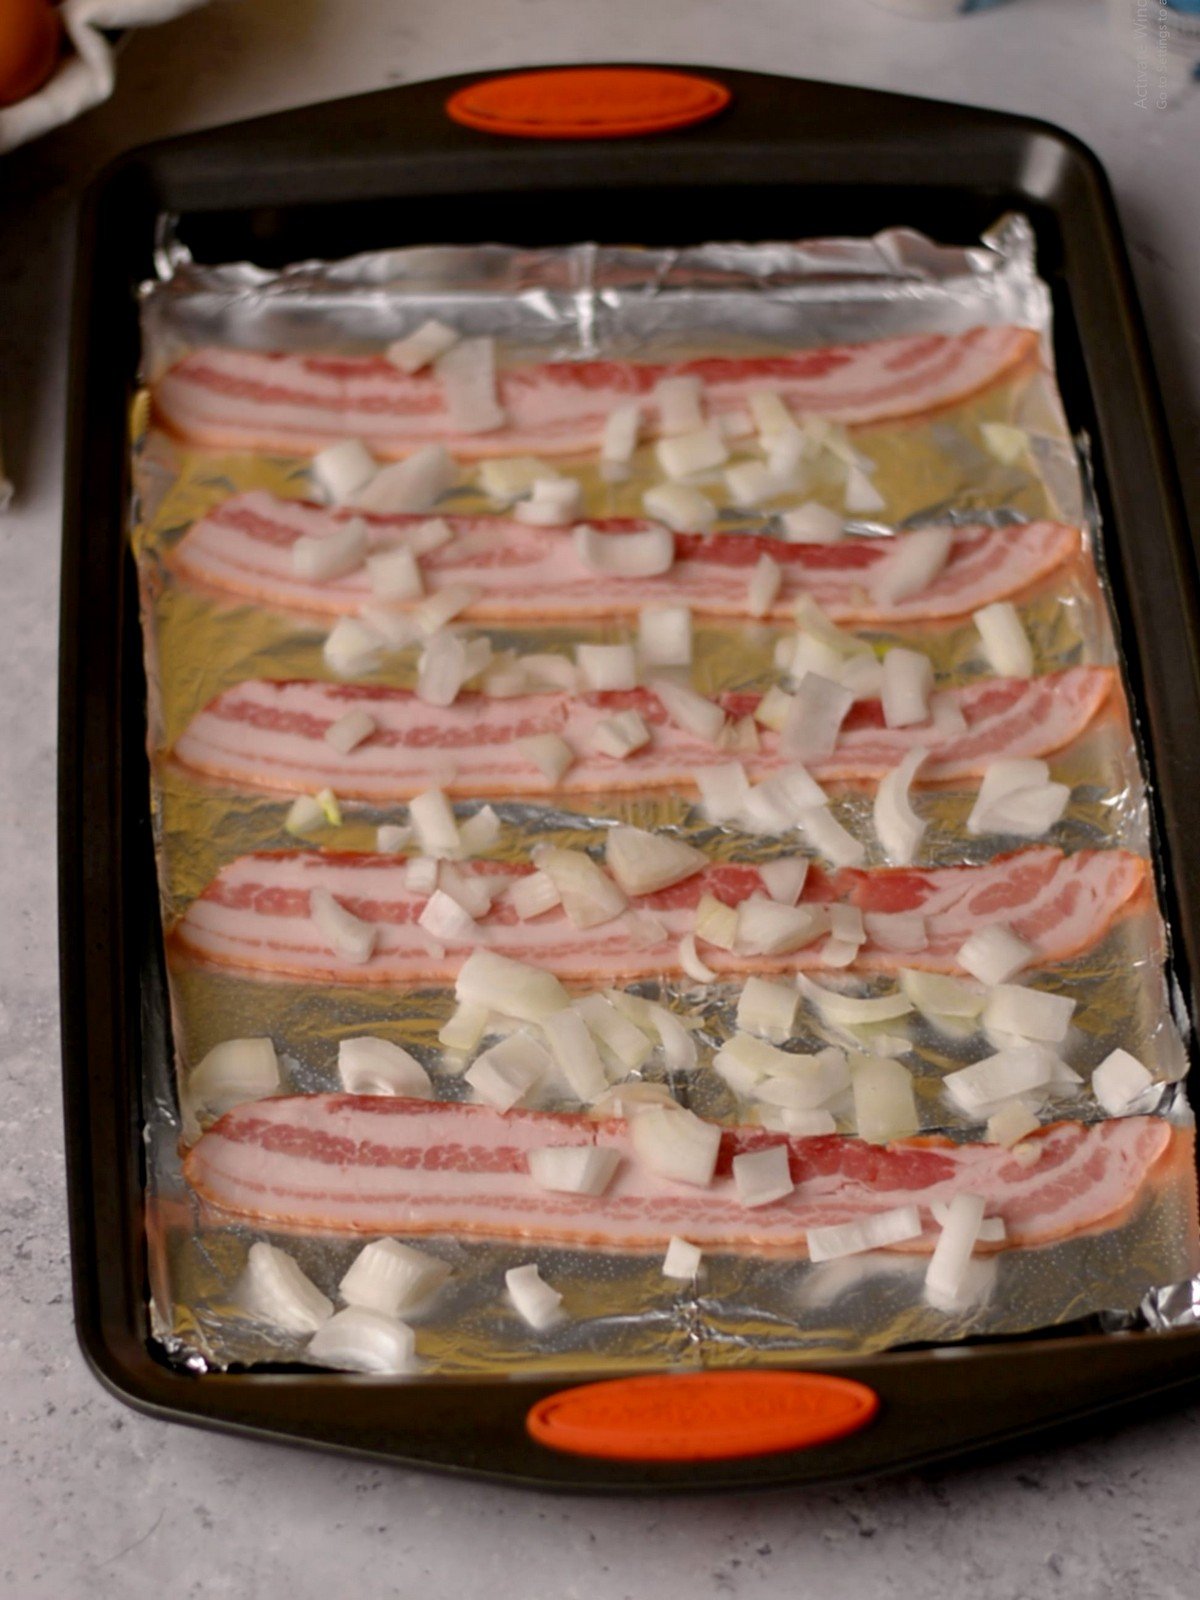 Bacon and diced onions on a baking tray lined with aluminum foil.